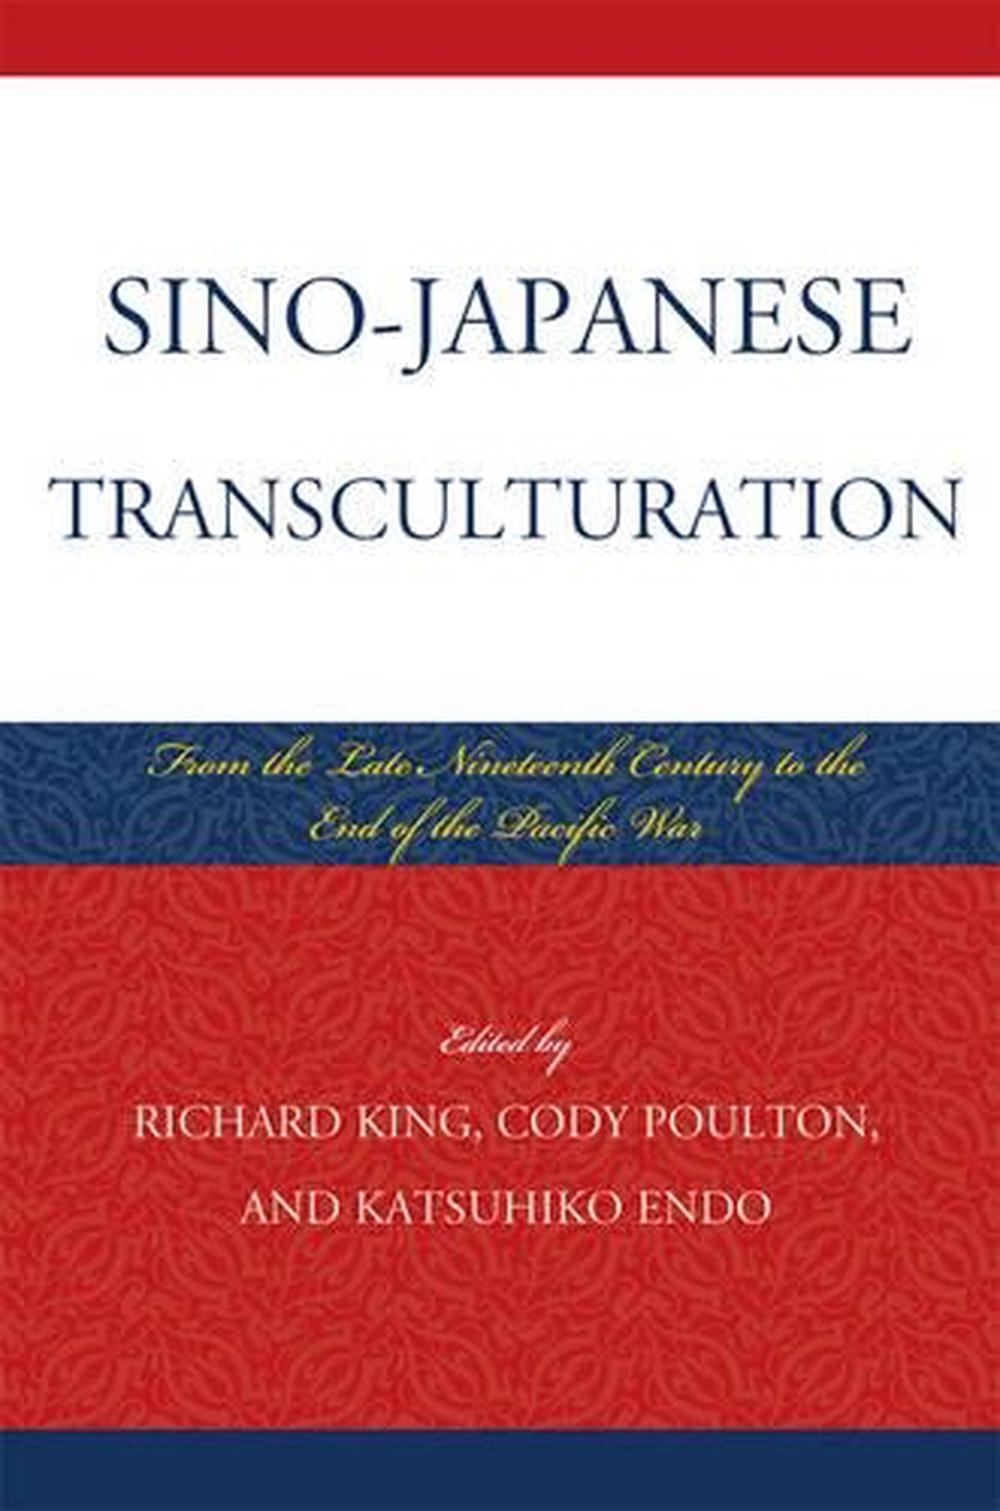 Sino-Japanese Transculturation: Late Nineteenth Century to the End of the Pacifi - Cody Poulton